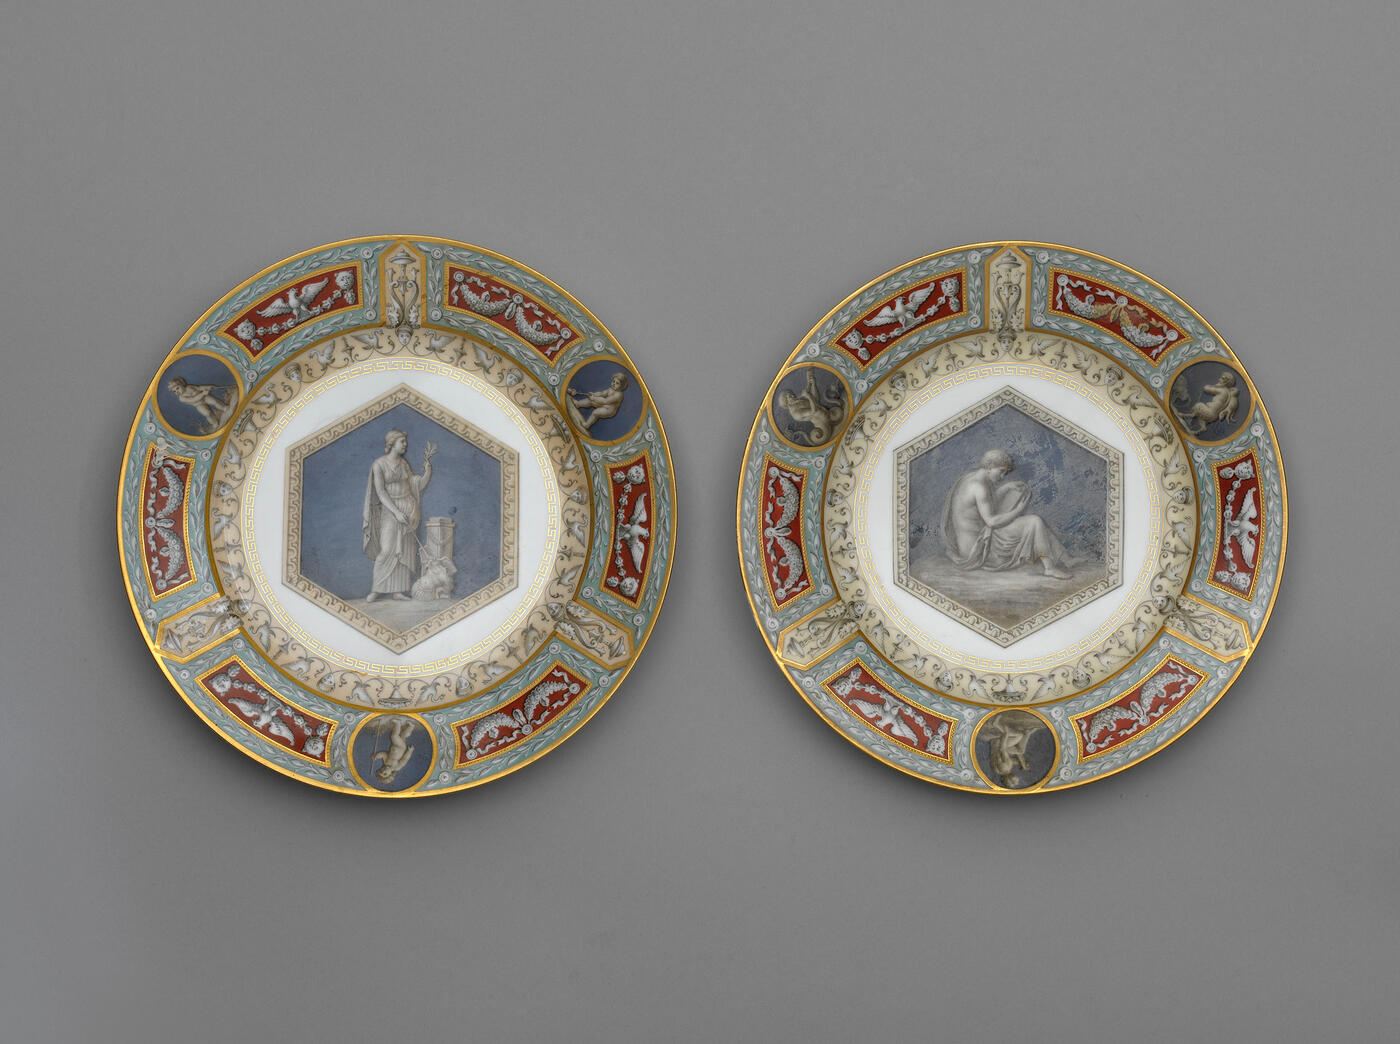 IMPERIAL PORCELAIN MANUFACTORY, PERIOD OF ALEXANDER III (1881-1894), 1885 AND 1894